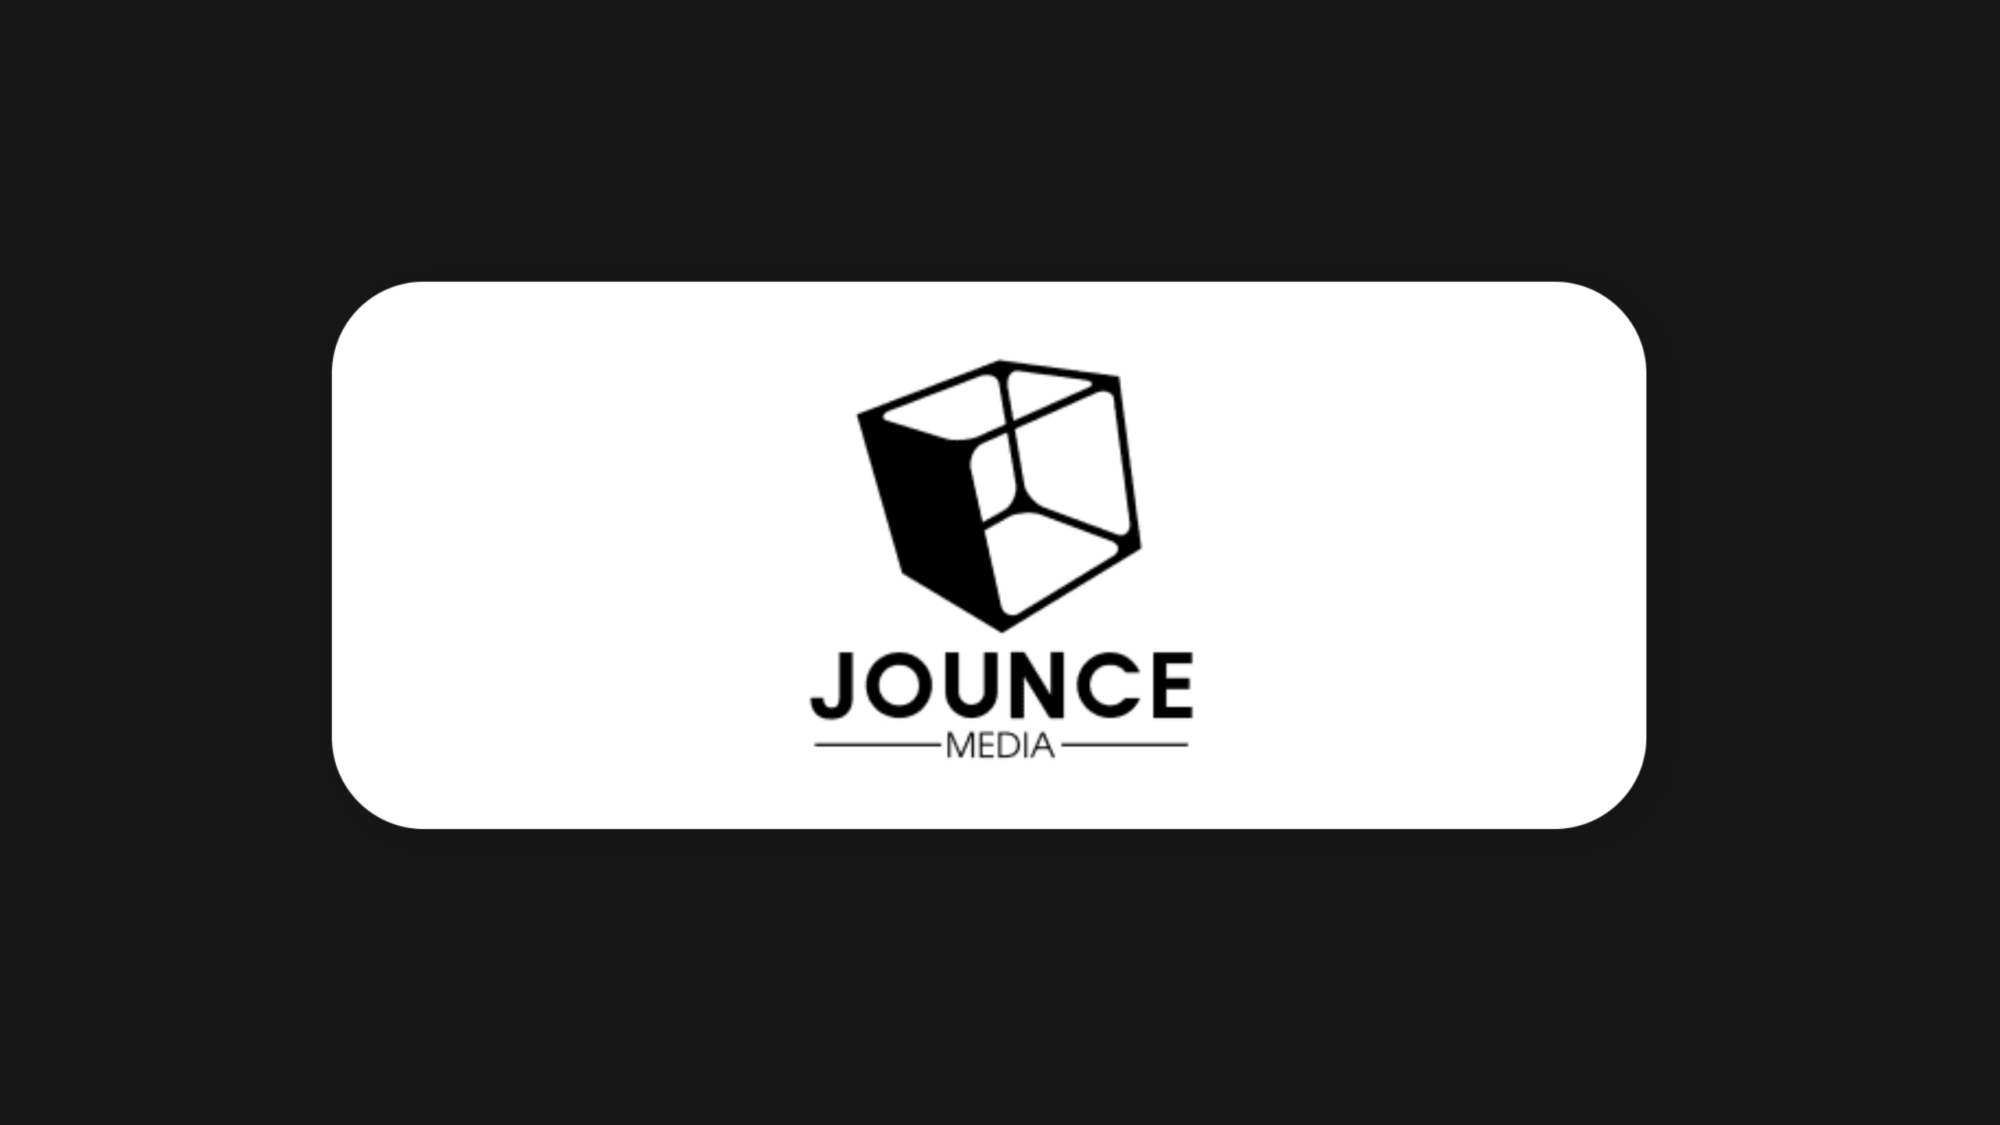 Jounce Media identifies Raptive as the leading sales house by volume